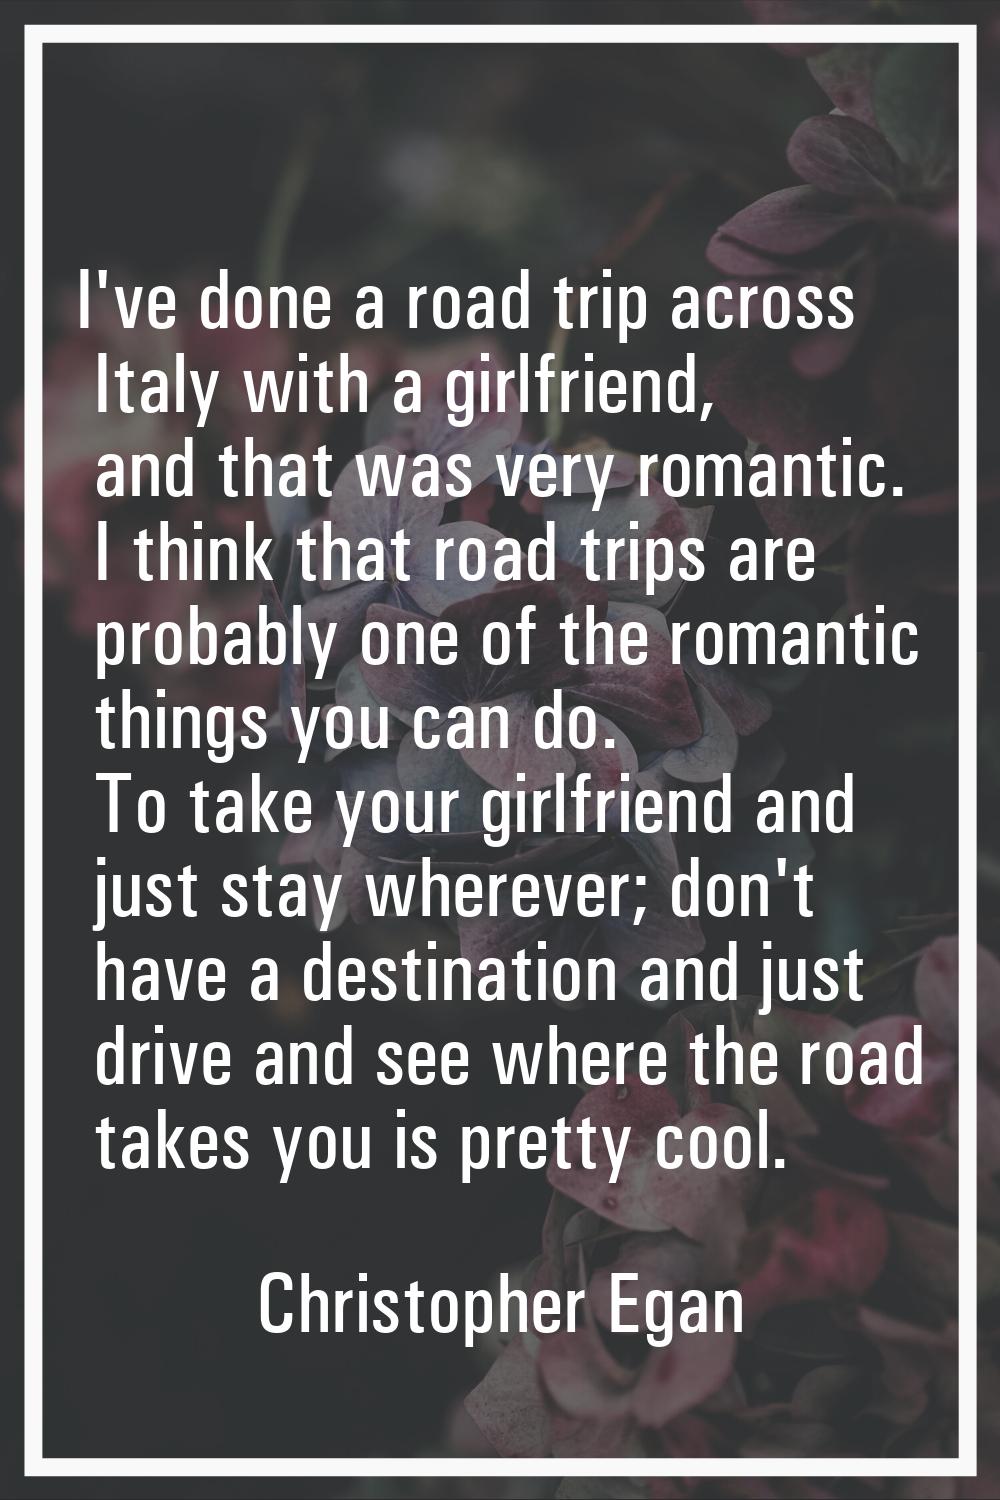 I've done a road trip across Italy with a girlfriend, and that was very romantic. I think that road